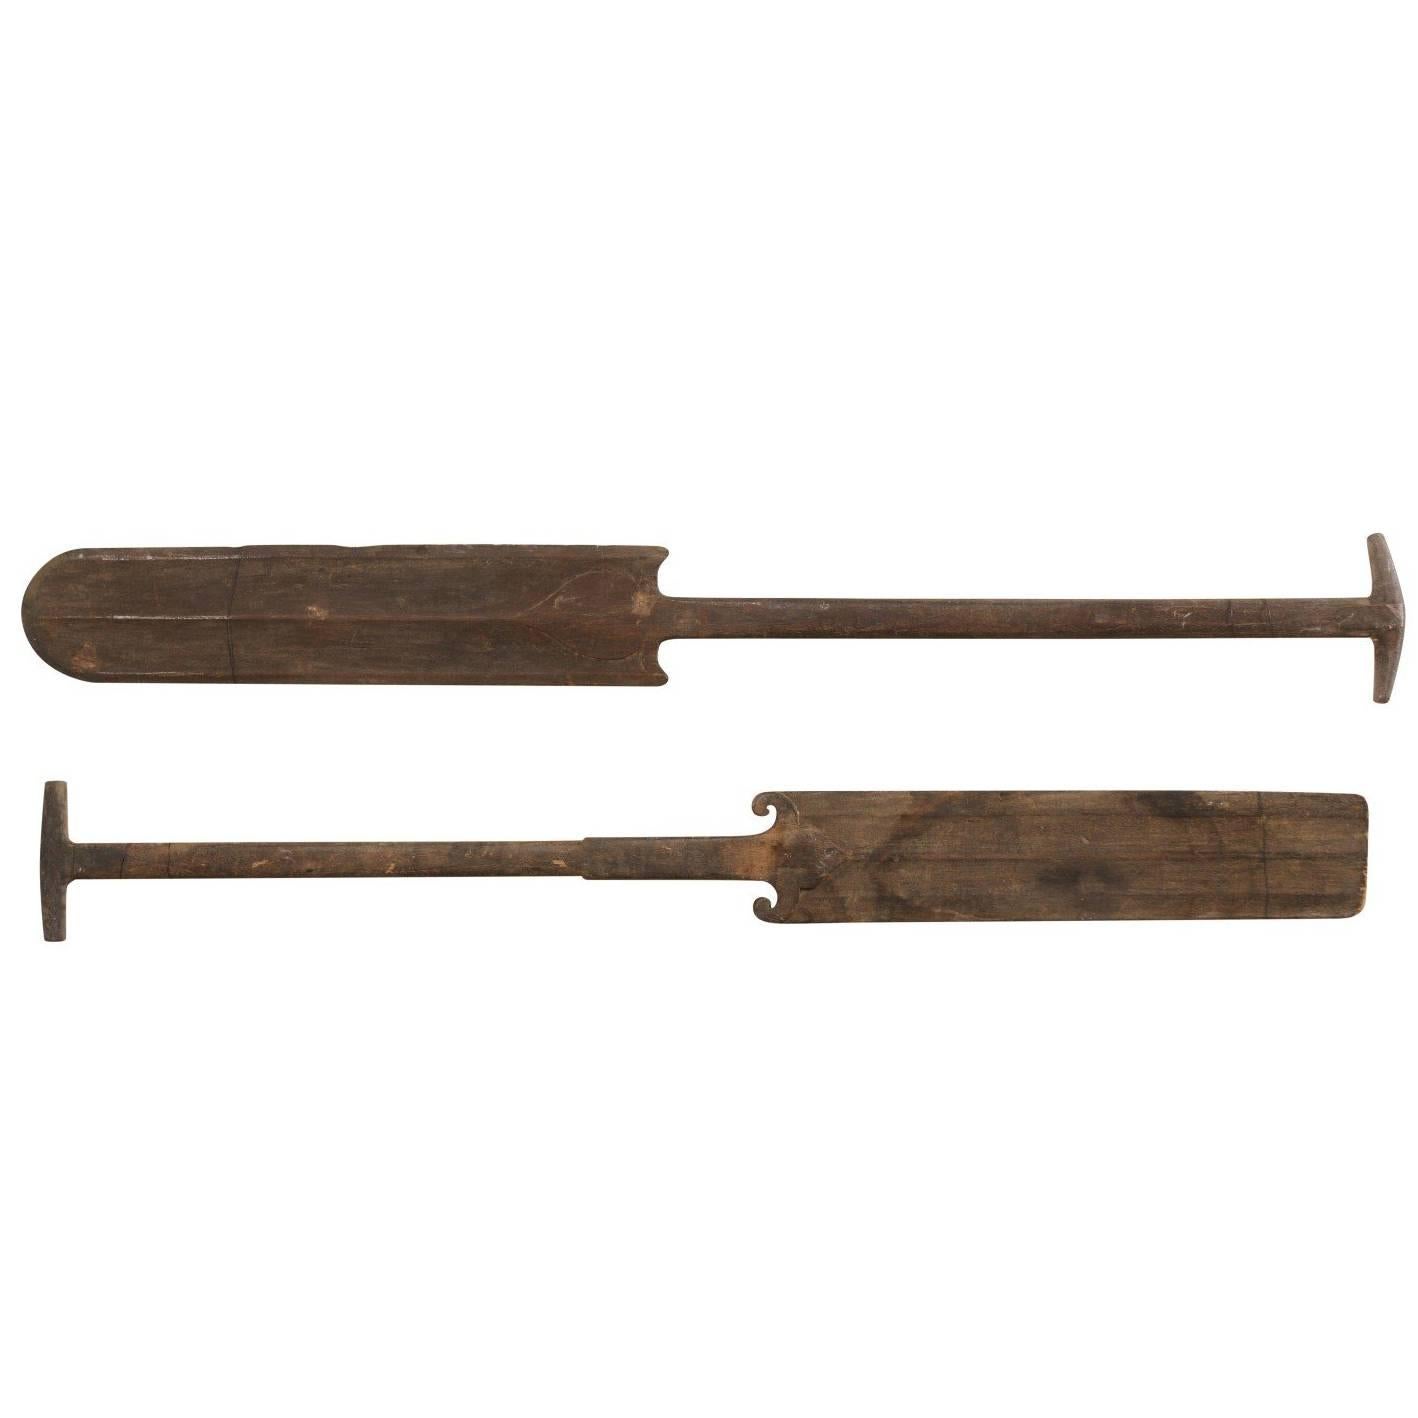 Pair of Large Wooden Boat Steering Paddles from Kerala, South India